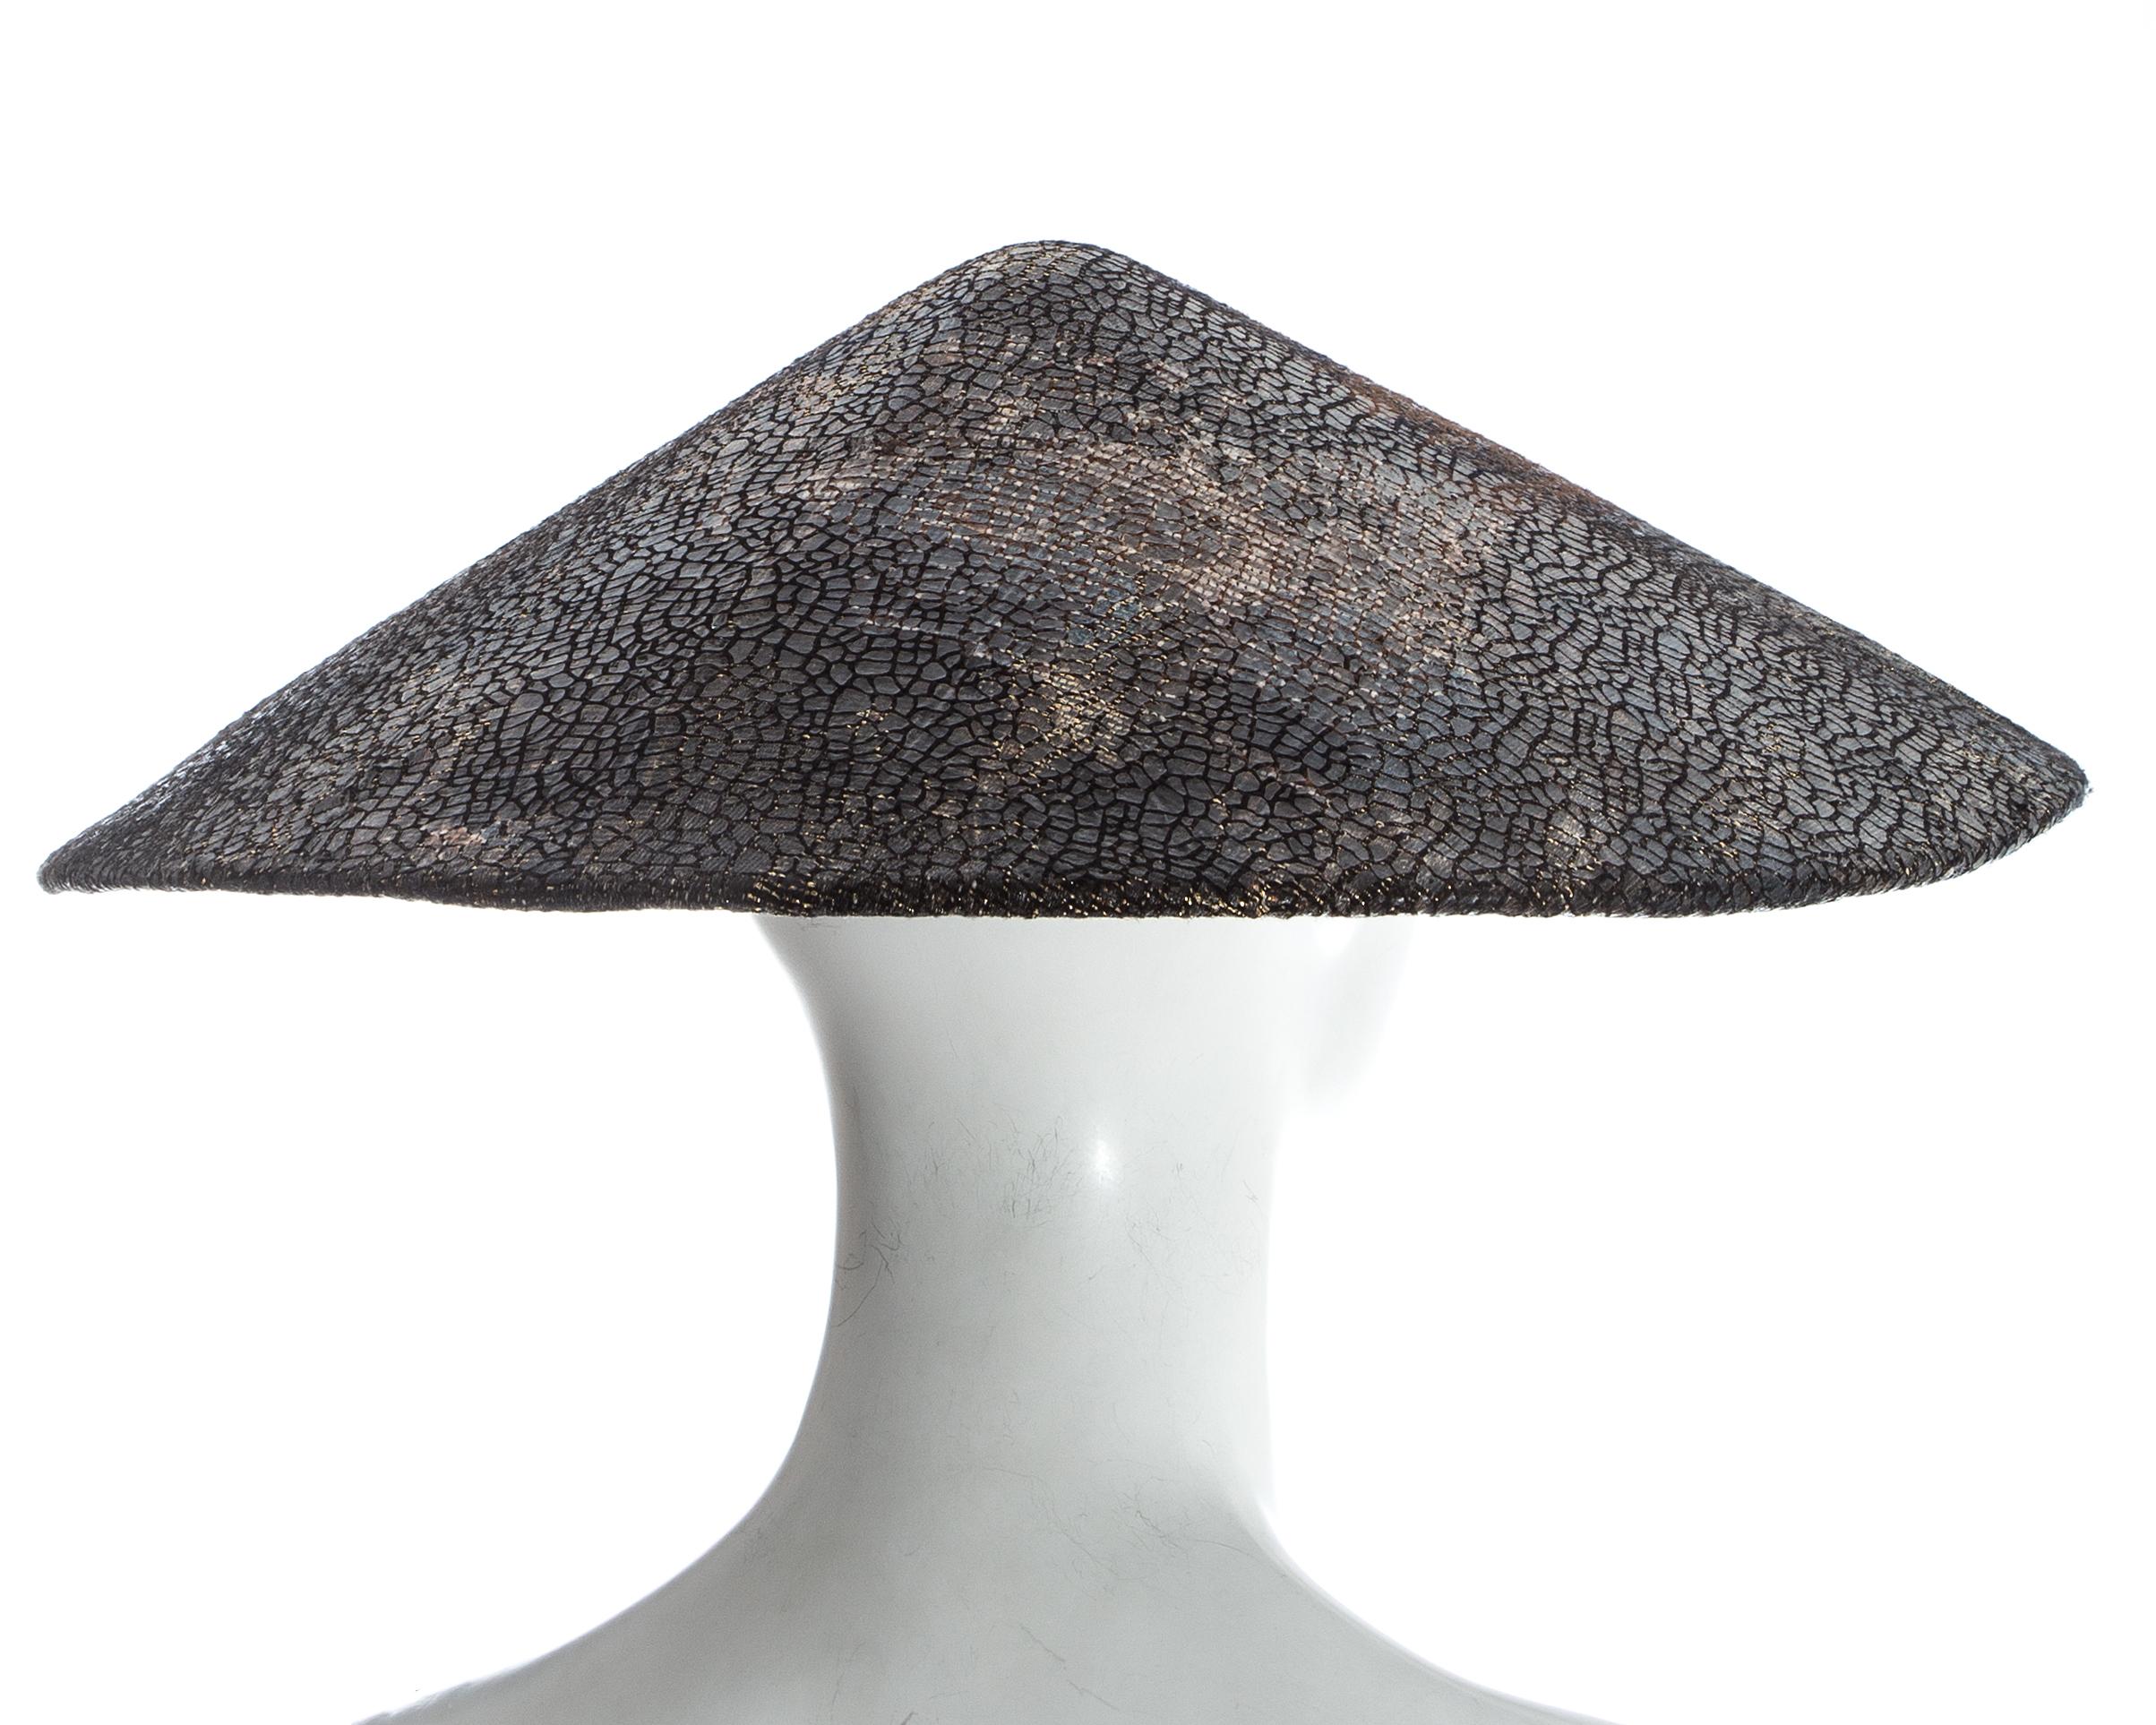 Chanel by Karl Lagerfeld, 'Paris-Shangai' bronze sequin conical hat, pf 2010 For Sale 3